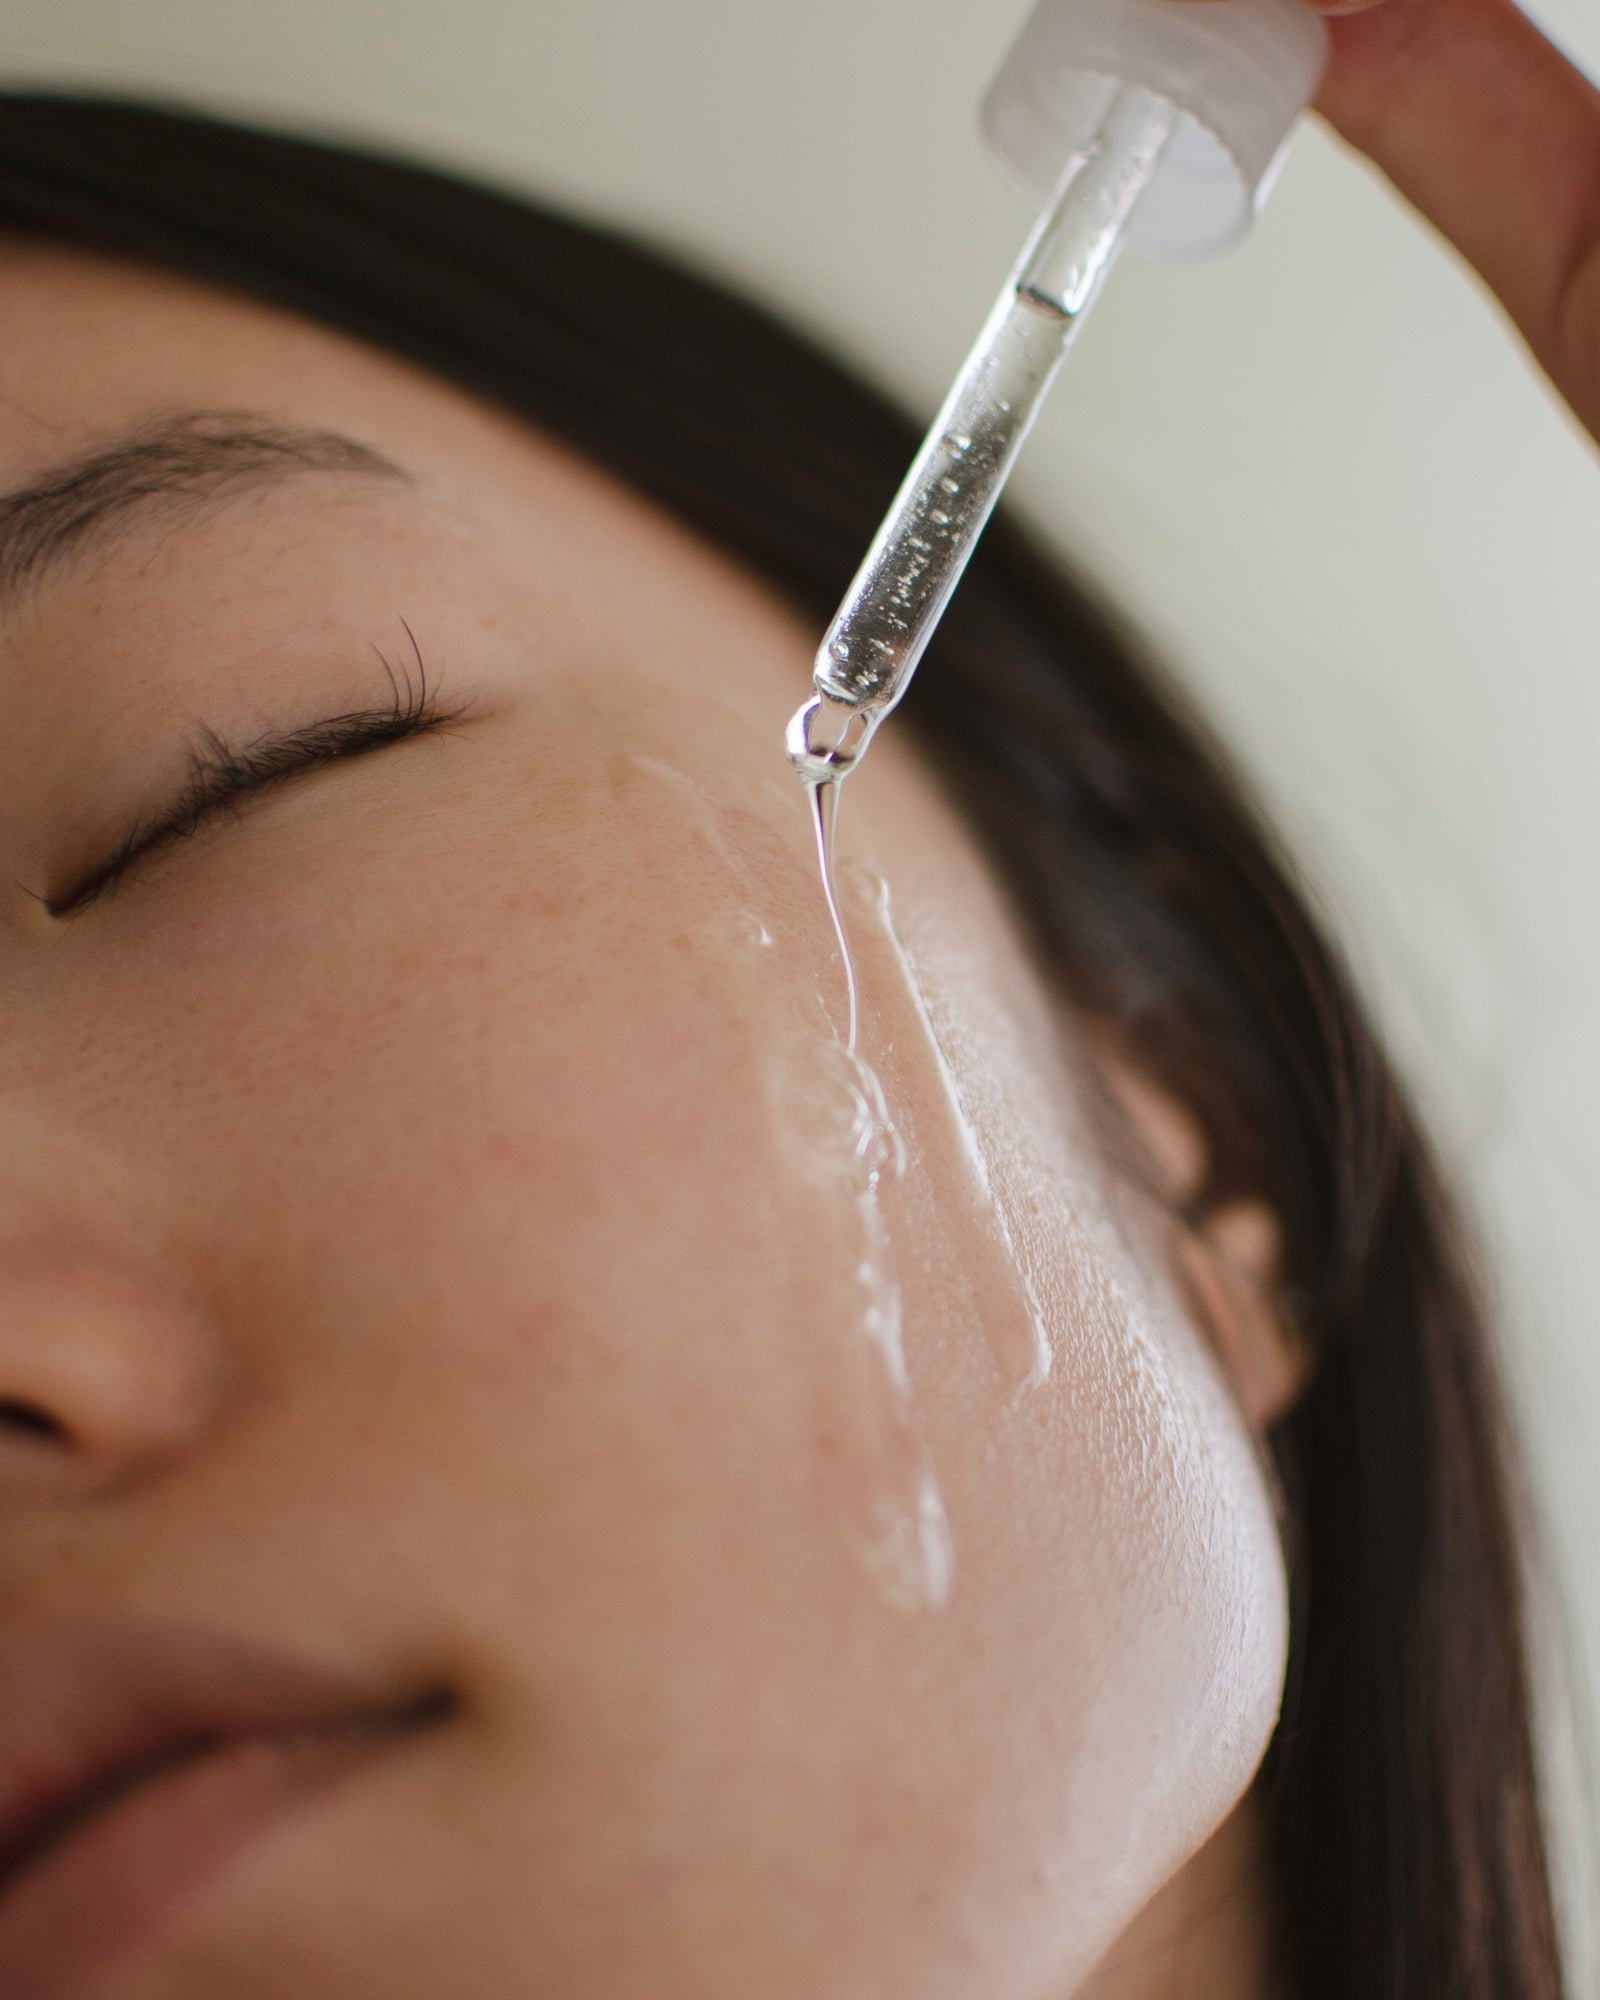 The worst skincare advice I was ever given - Ranked